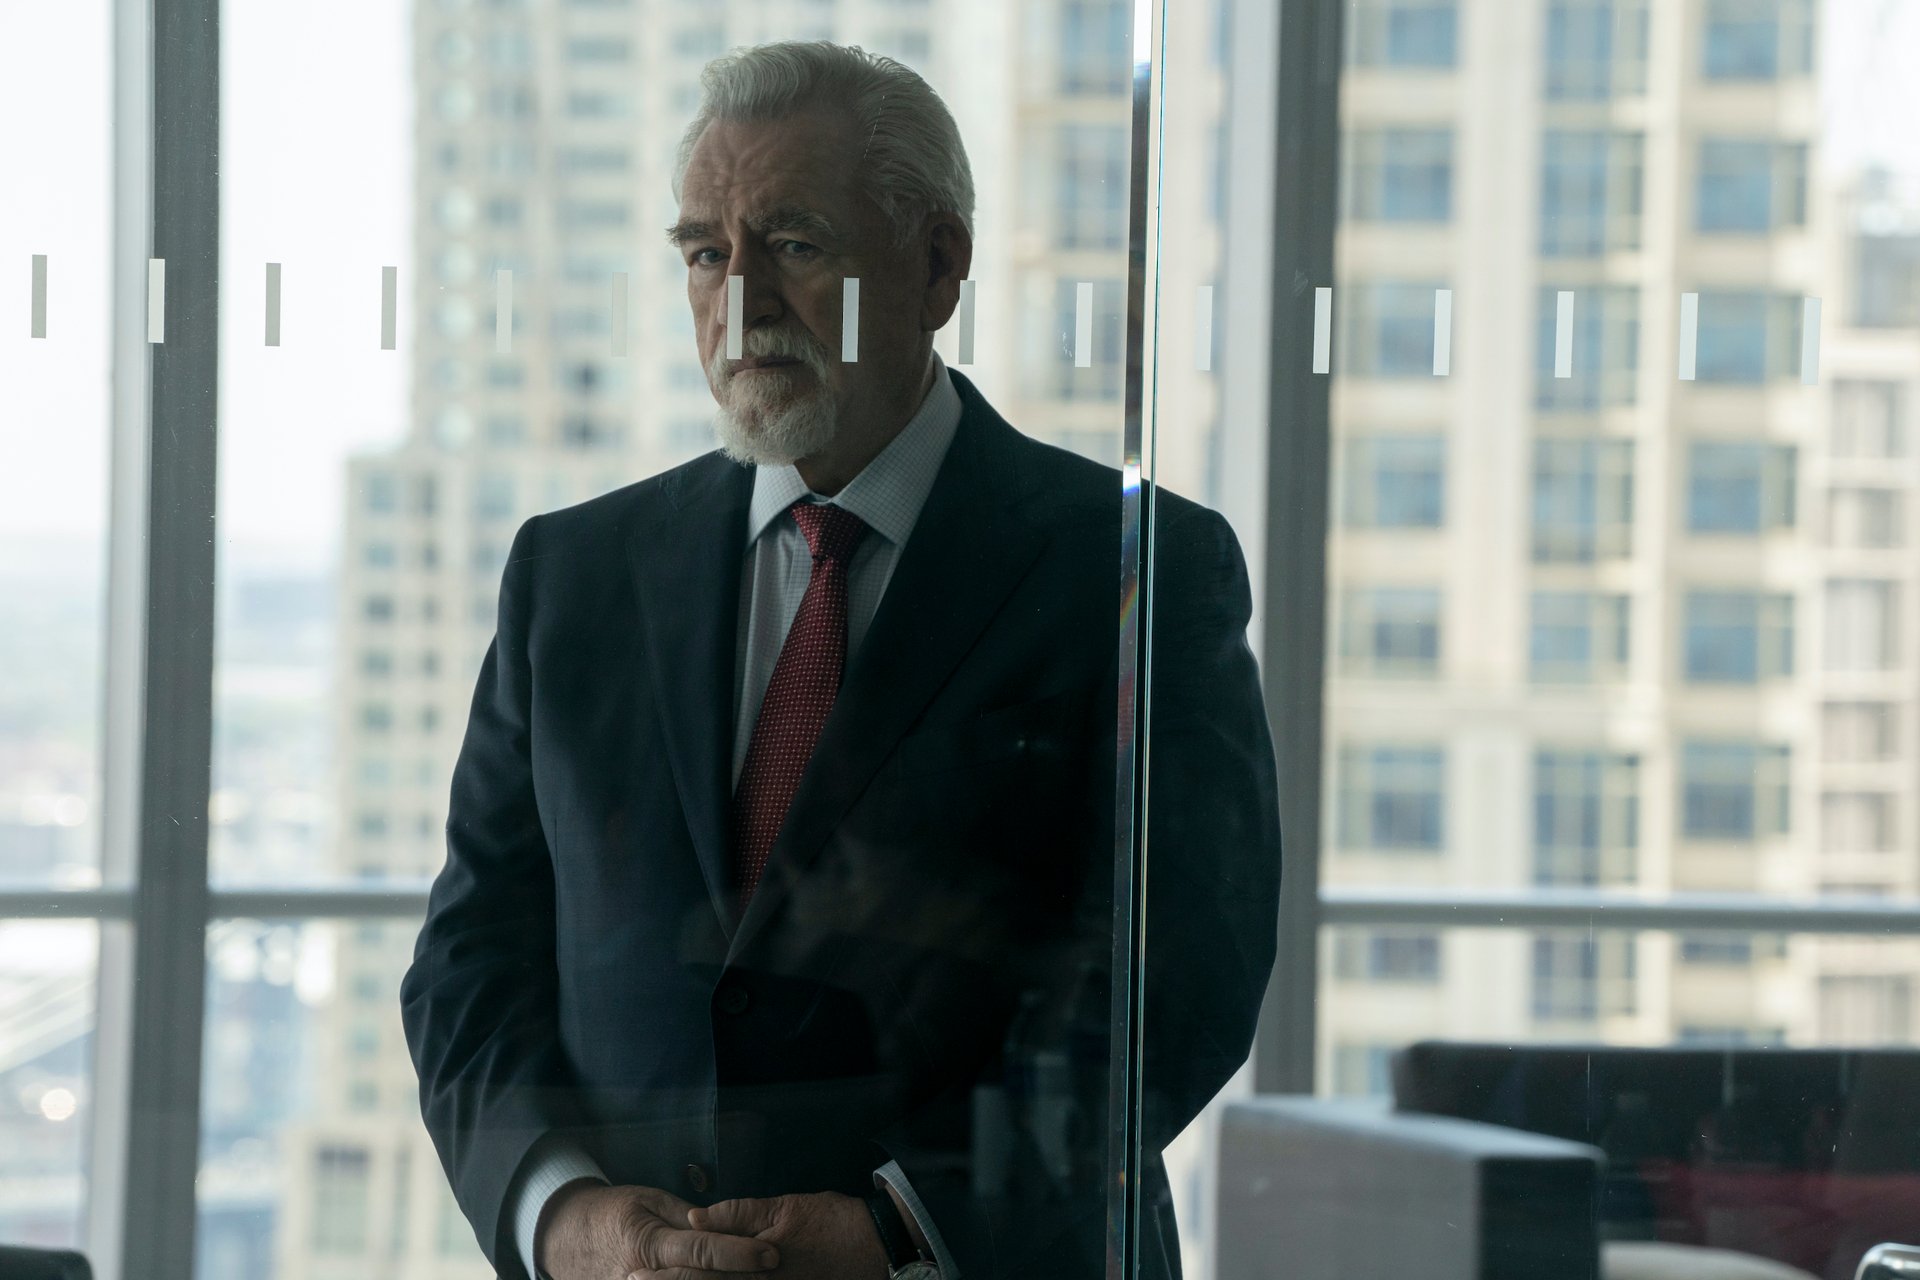 Brian Cox as Logan Roy in 'Succession' Season 3 Episode 8. He's standing behind glass doors and looking out.